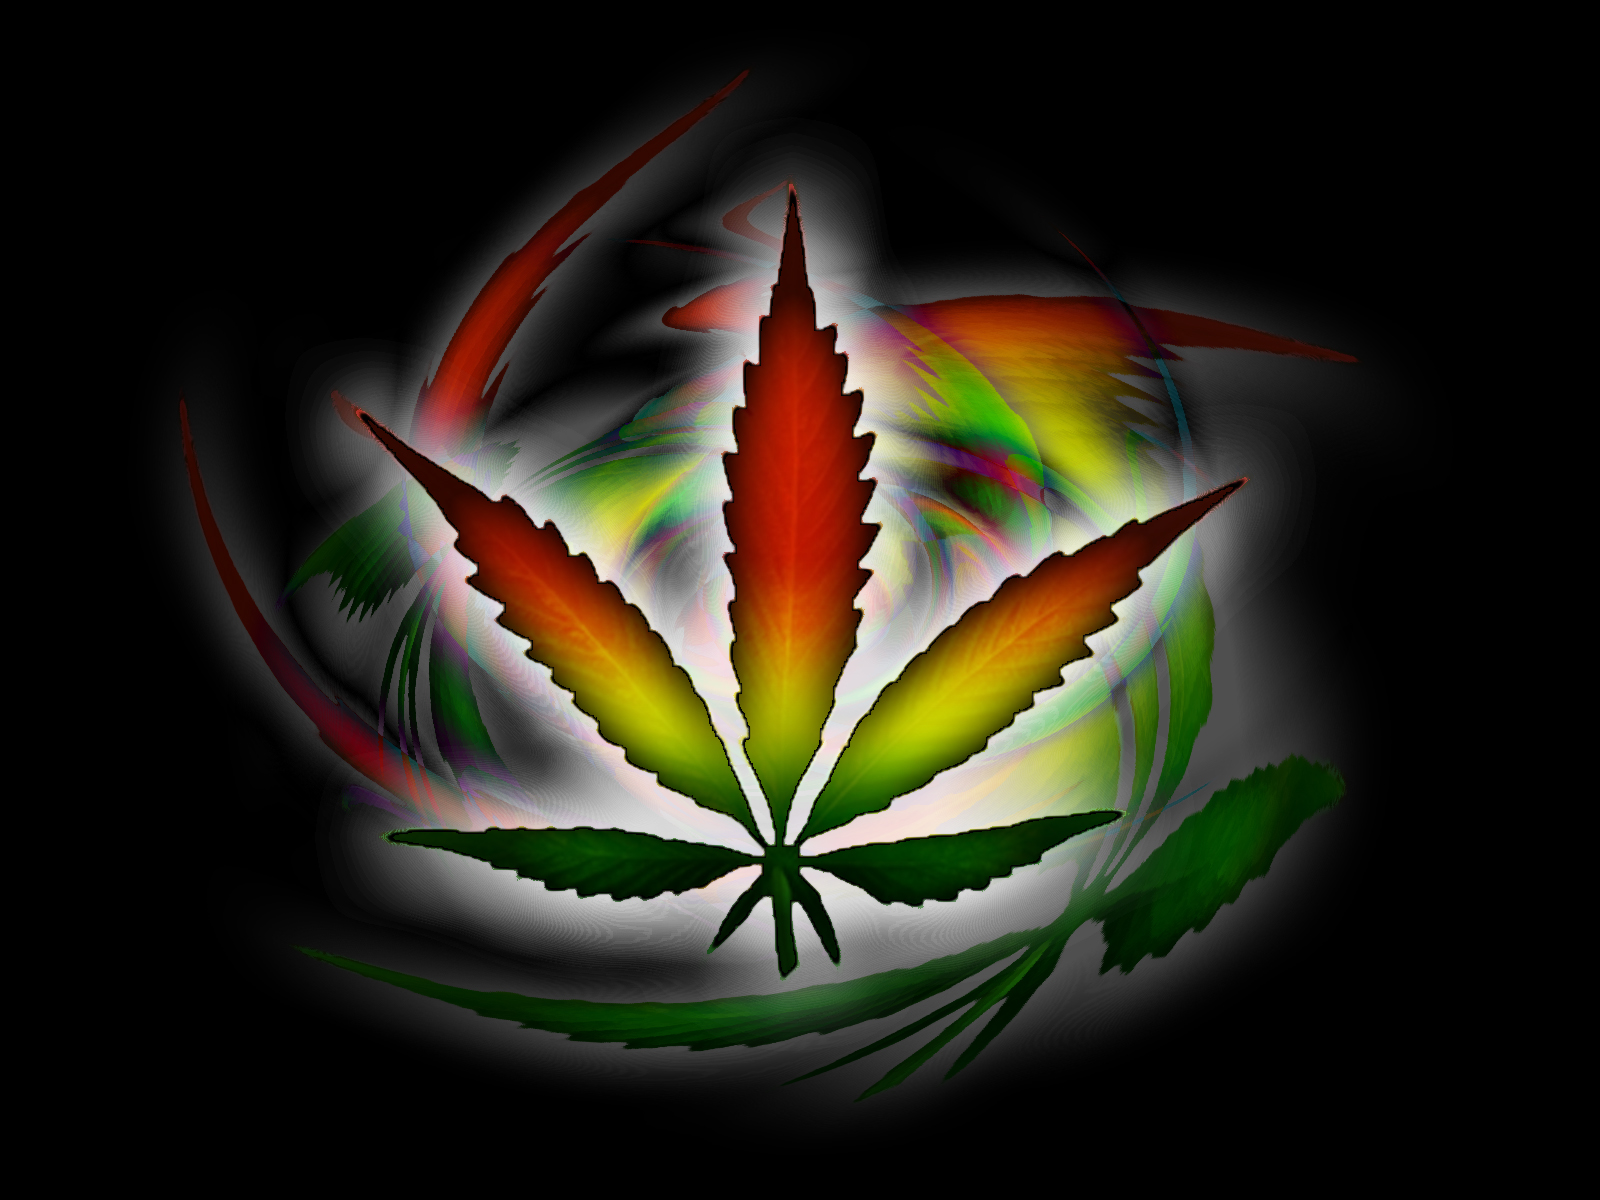 Free 420 Backgrounds! | 24/7 4:20